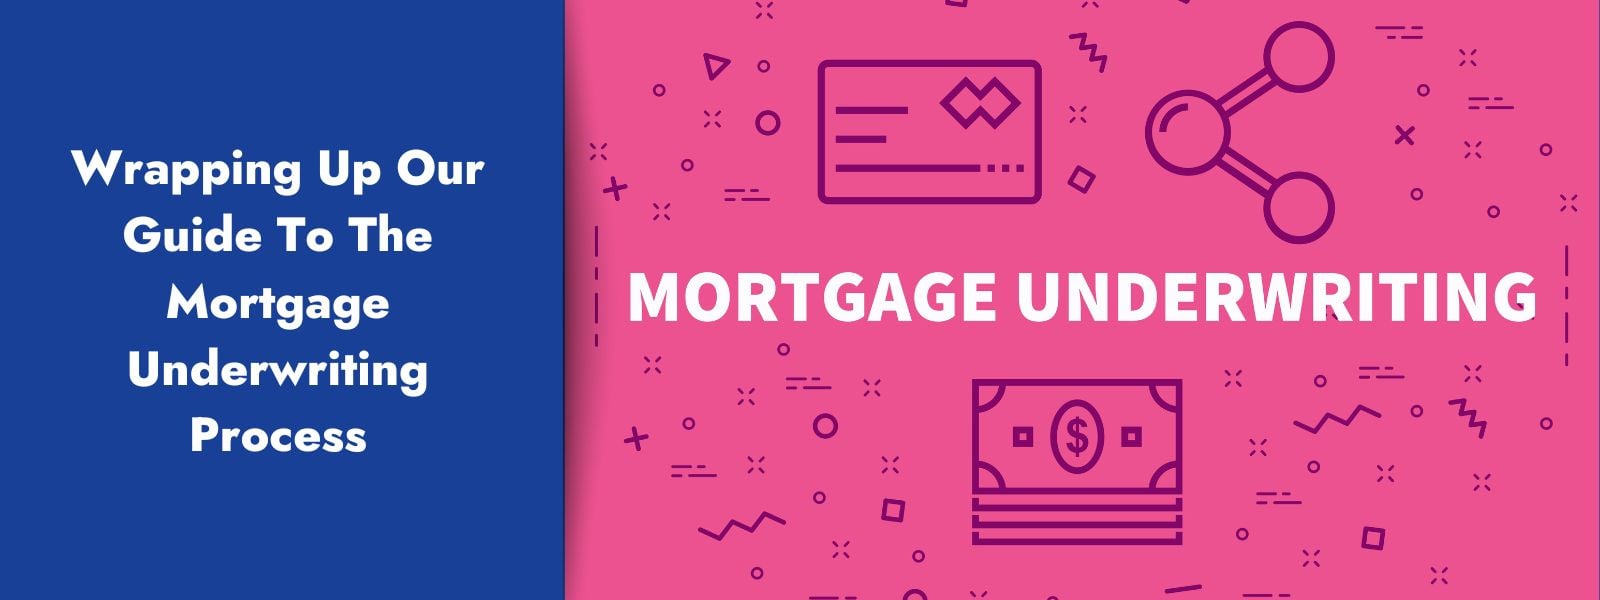 Wrapping Up Our Guide To The Mortgage Underwriting Process